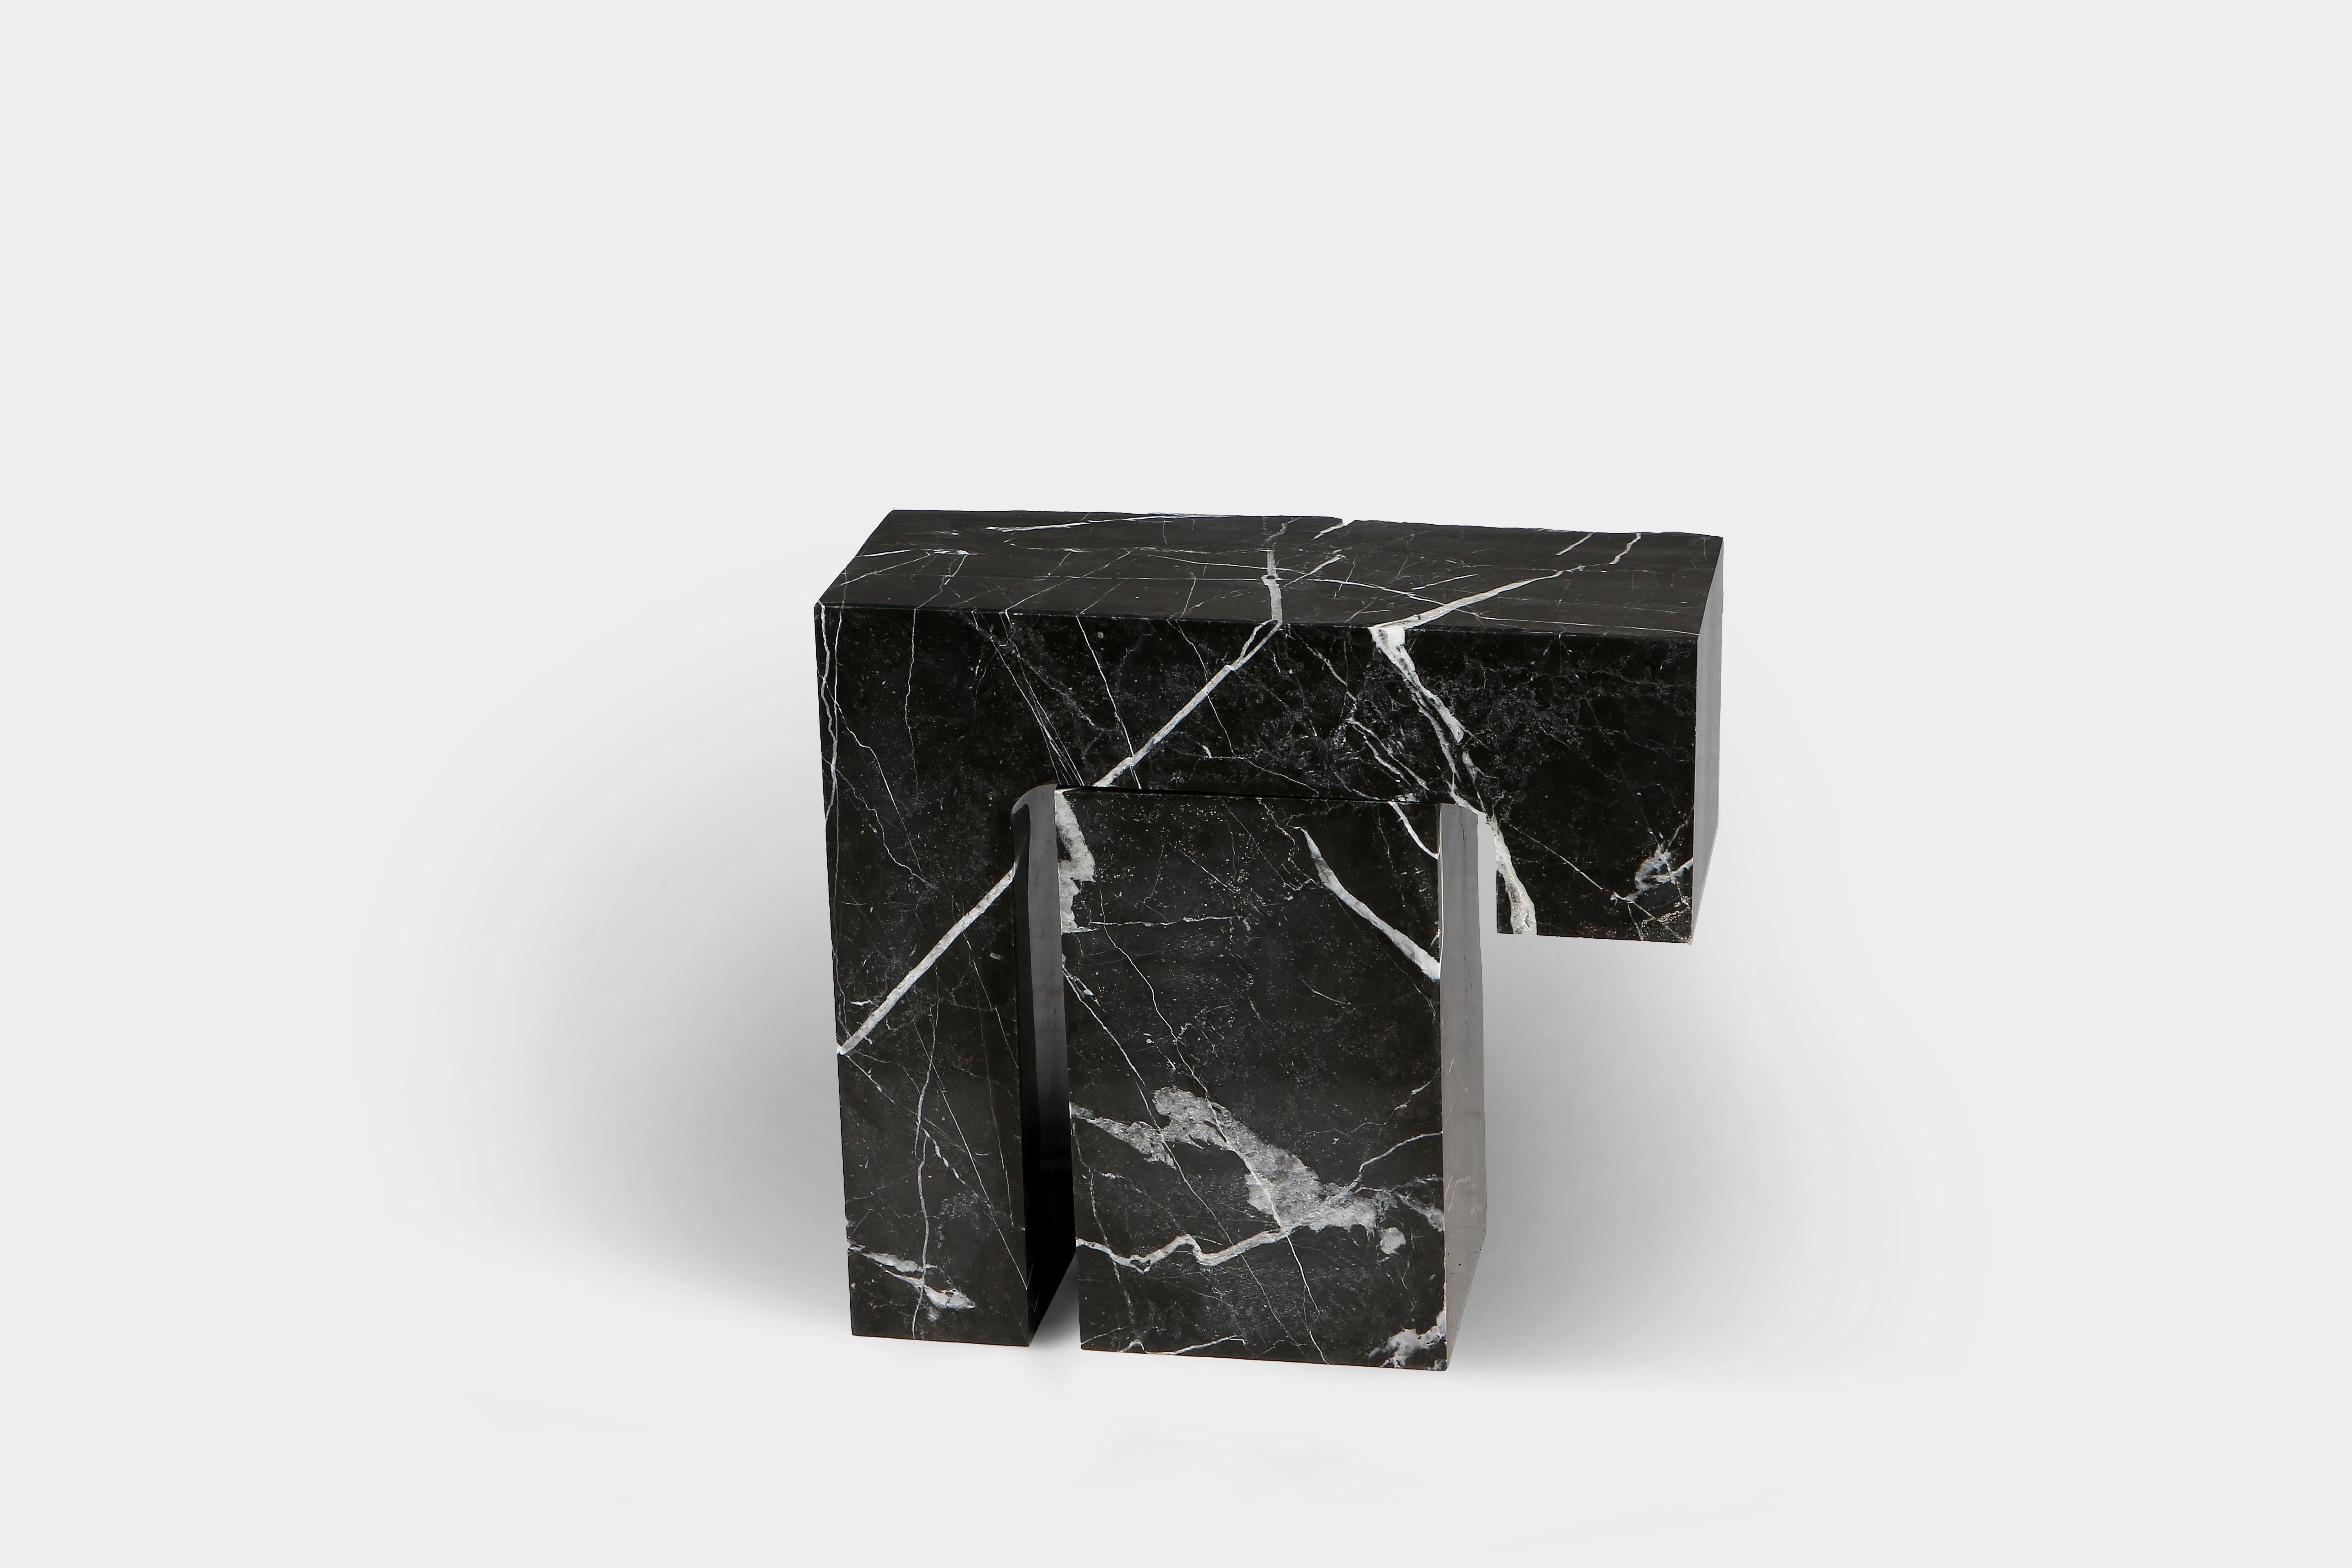 Spontaneity, environmental awareness and the primeval nature of the materials are central themes explored in Found II collection, which focuses on the power of the medium to dictate the final form these functional works of art take.

Side table